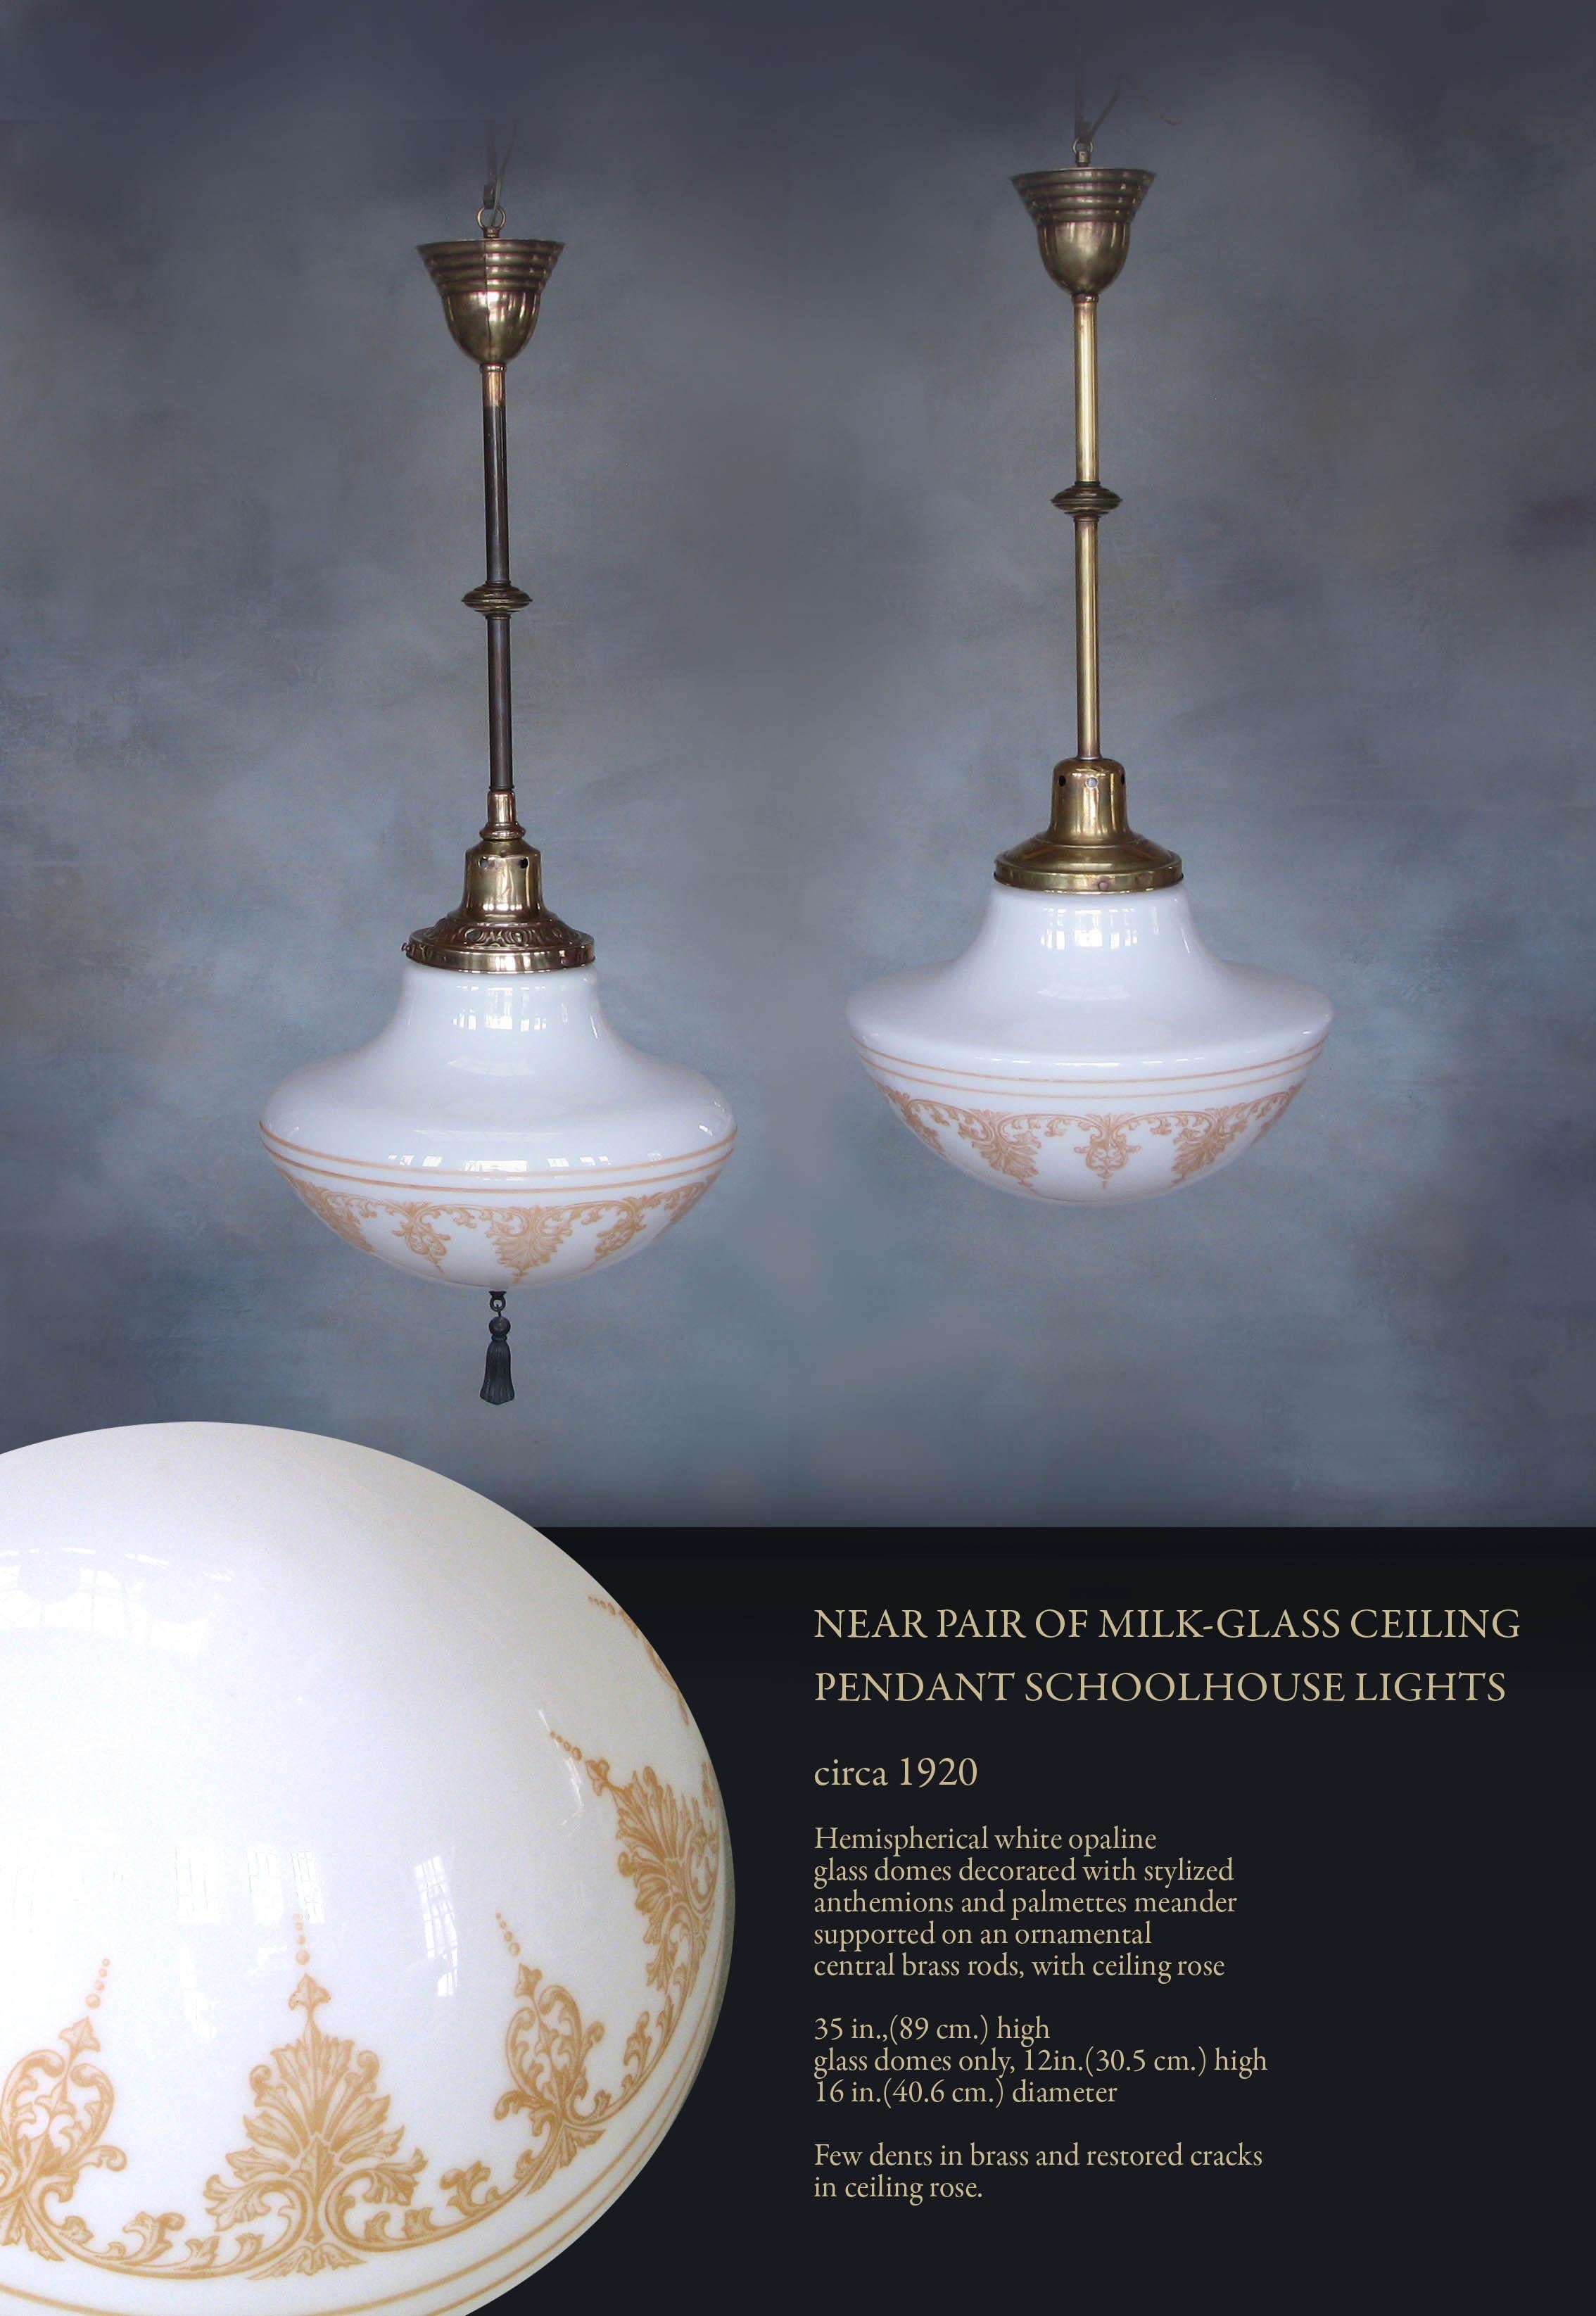 Near pair of milk-glass ceiling
pendant schoolhouse lights

Circa 1920.

Hemispherical white opaline
glass domes decorated with stylized
anthemions and palmettes meander
supported on an ornamental
central brass rods, with ceiling